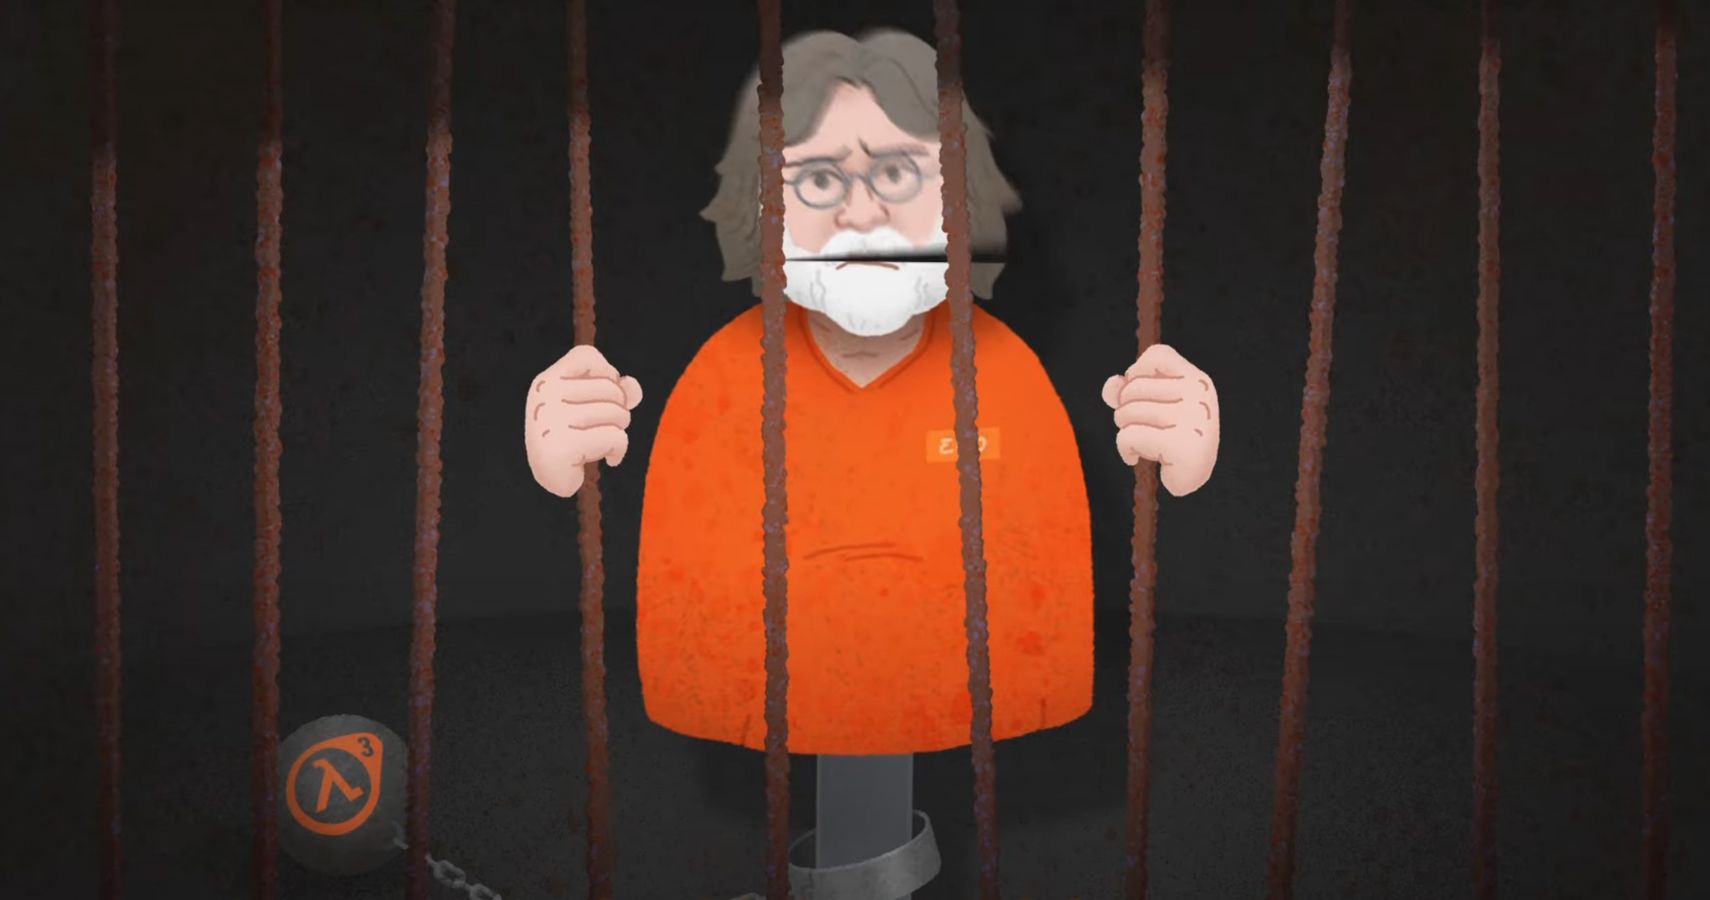 Gabe Newell Makes Cameo In Valve Comedy Song “Count To Three” -  